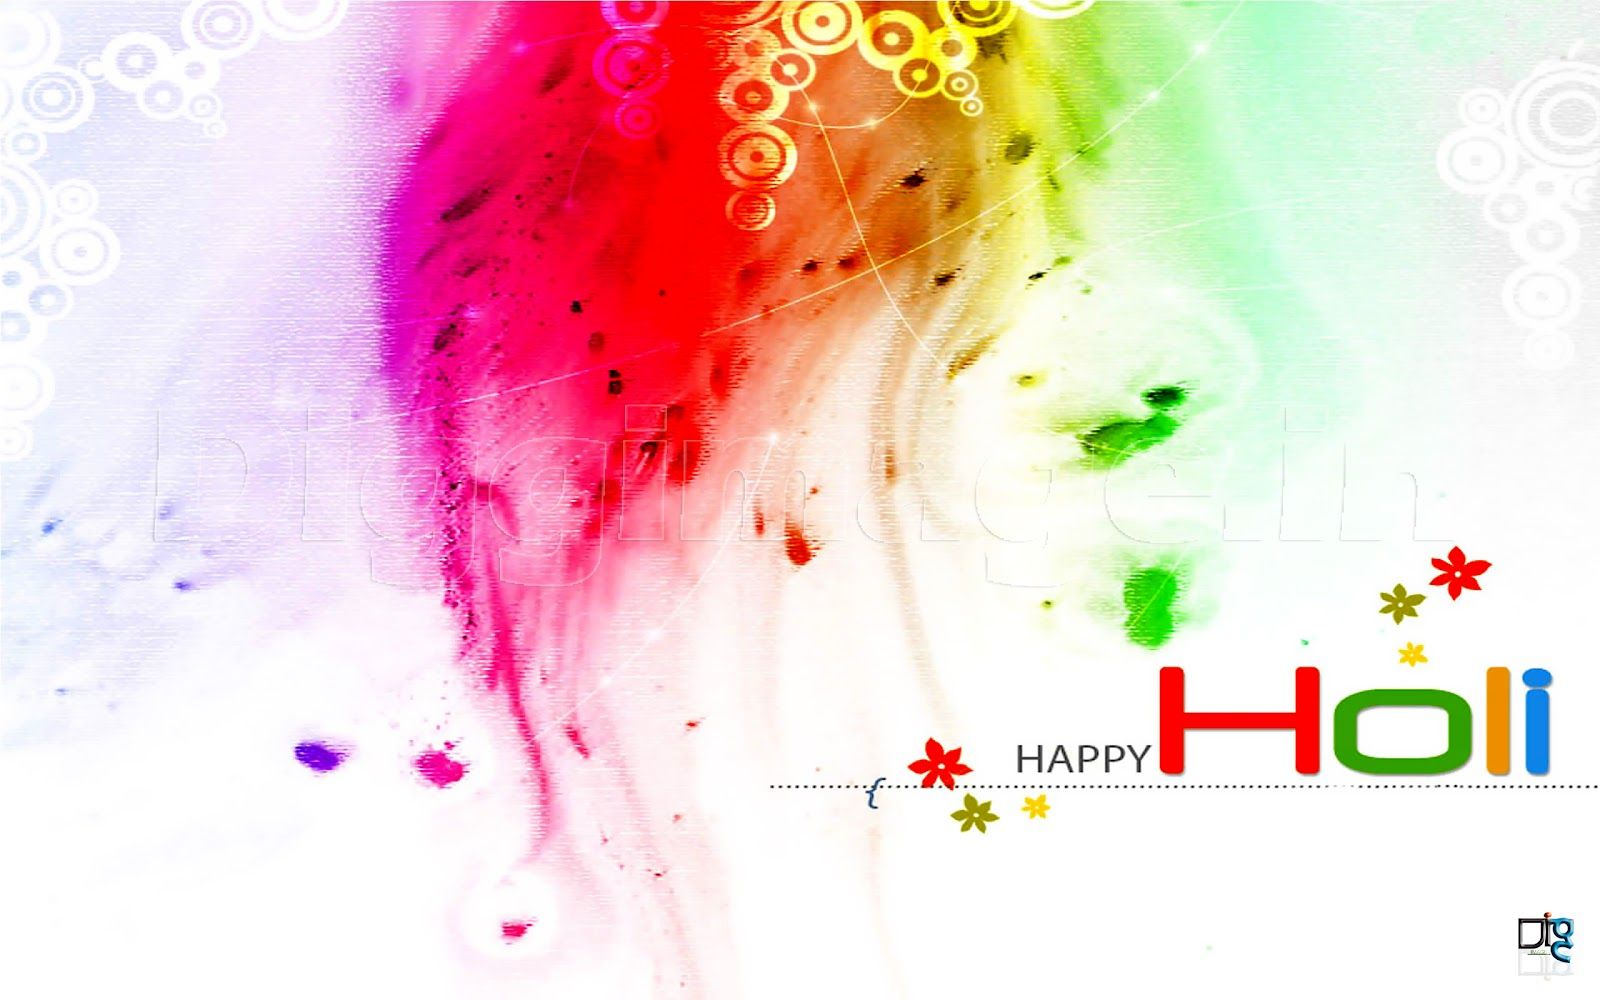 Happy Holi New Colorful Greetings 2012 and Scraps for orkut free wallpaper i g g I m a g e